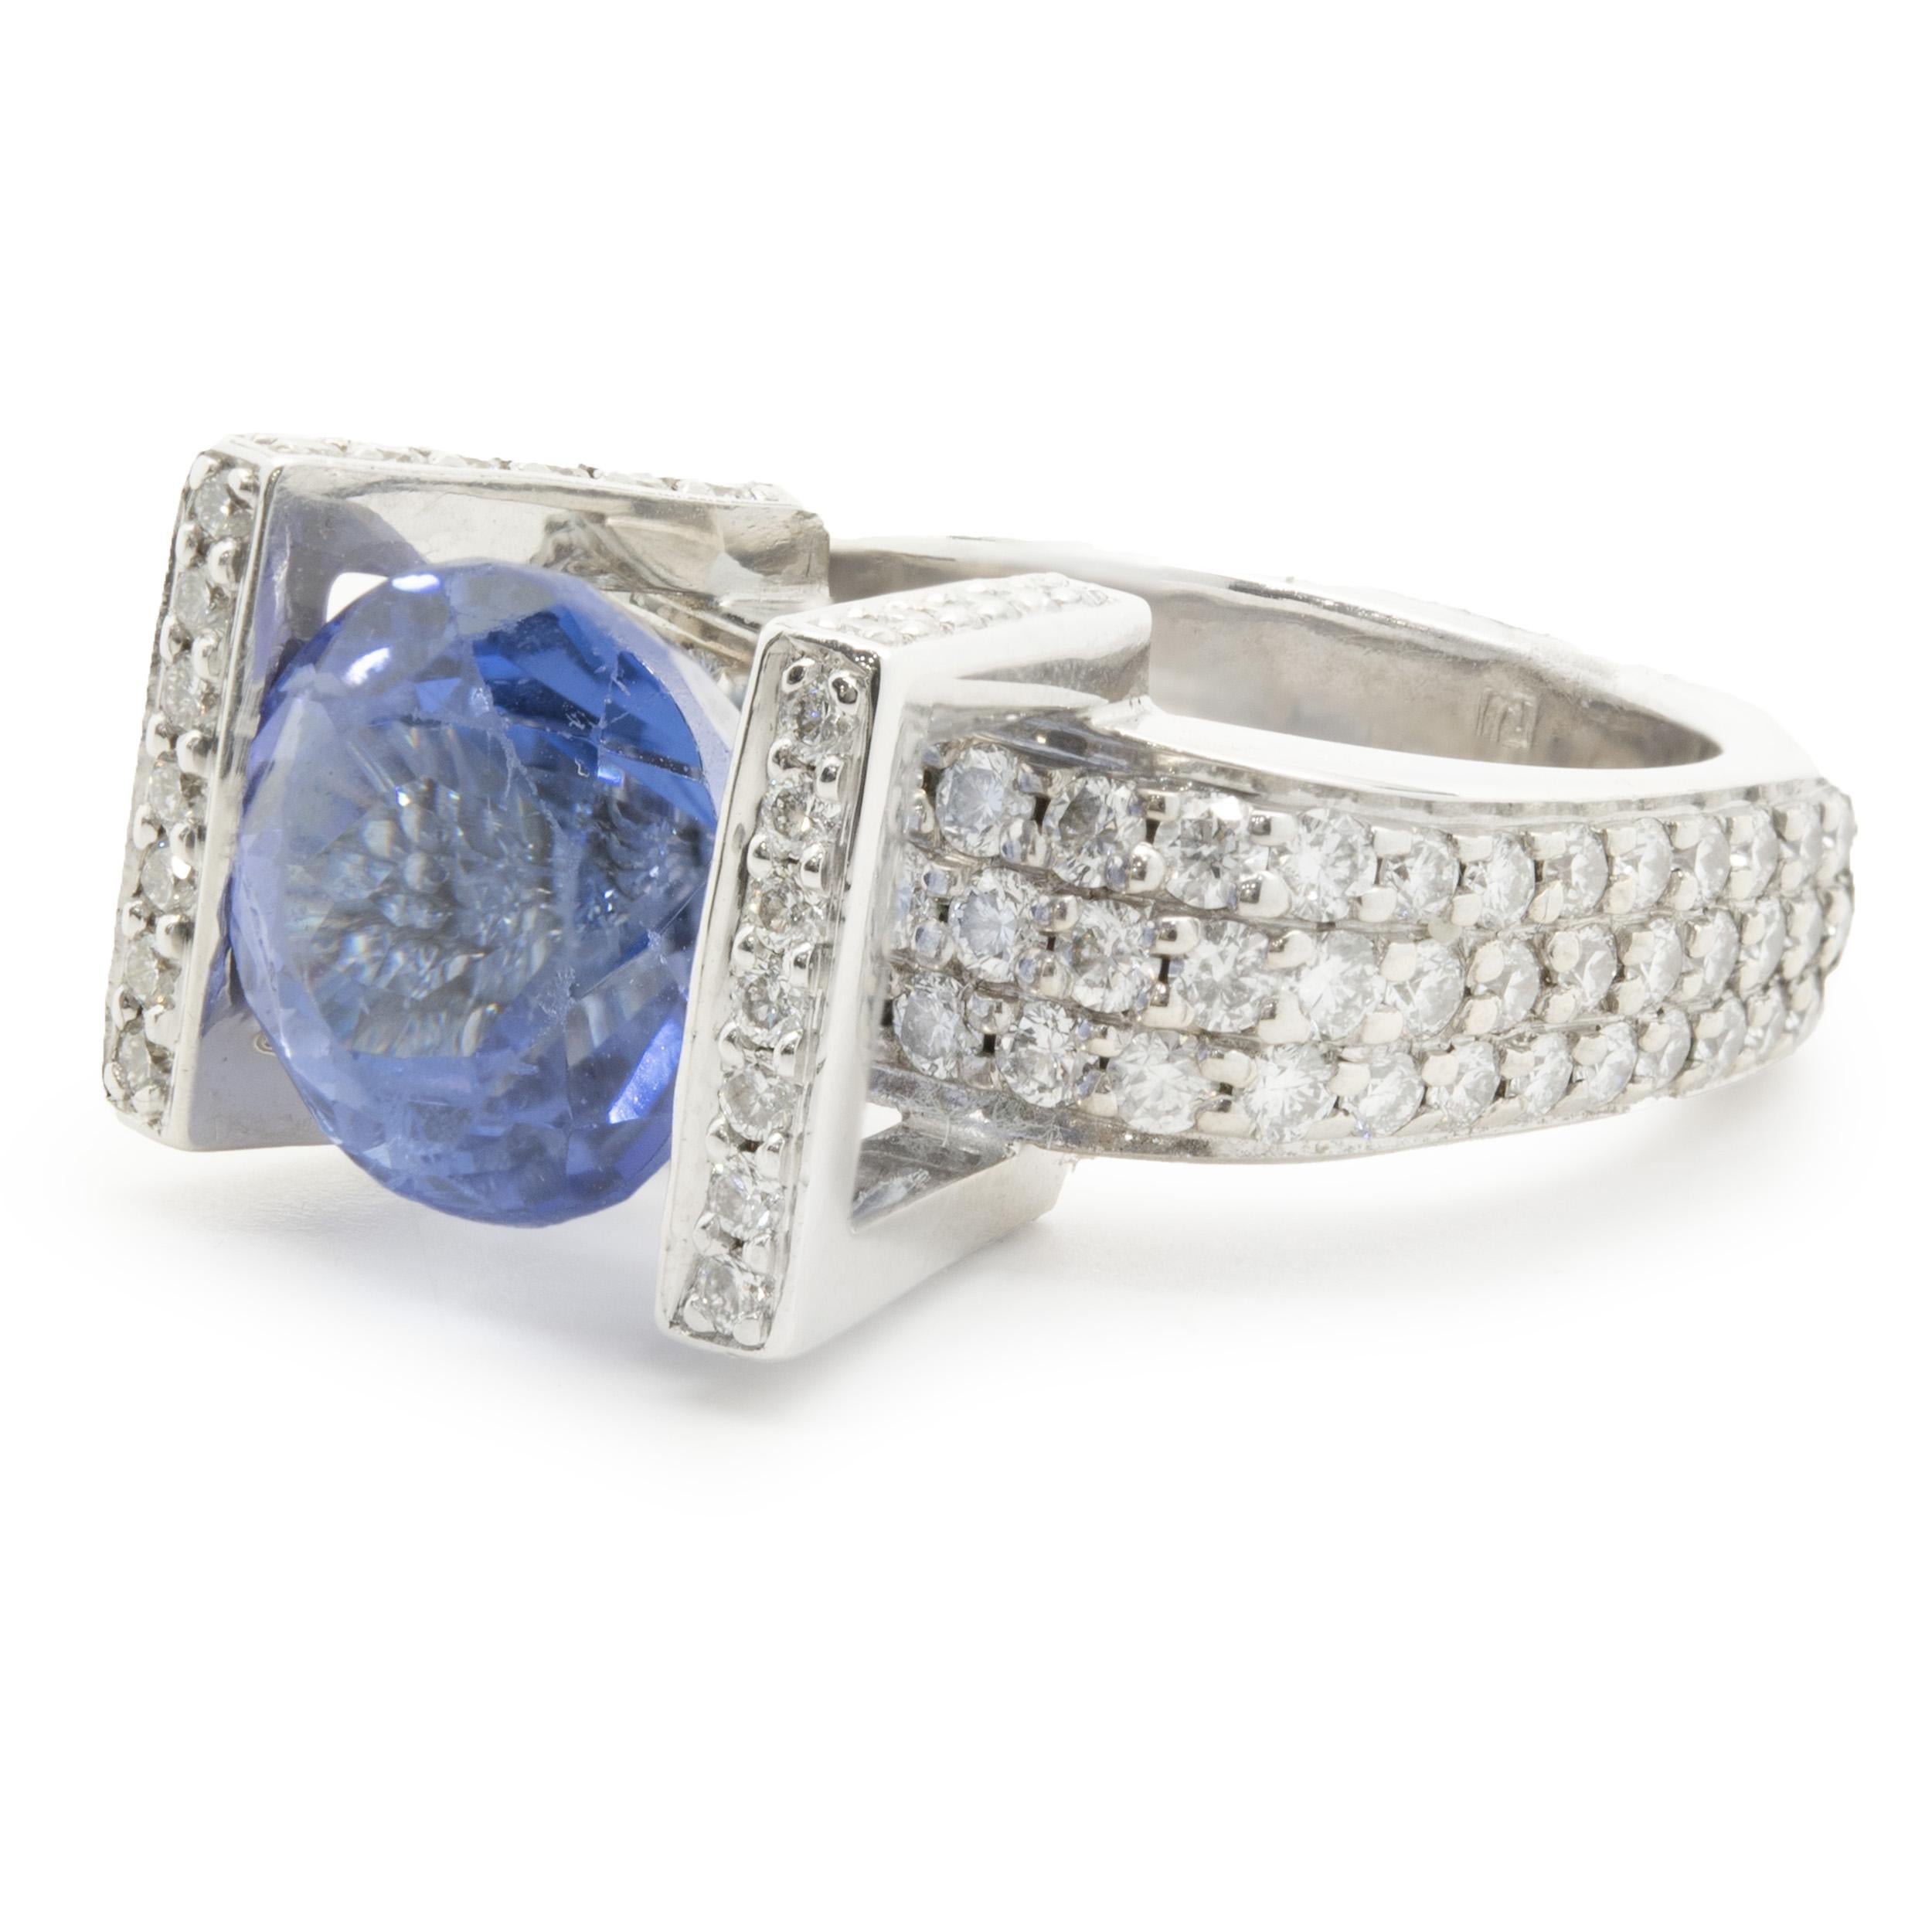 Designer: Gauthier
Material: 14K white gold
Tanzanite: 1 round cut = 5.50ct
Diamond: 117 round brilliant cut = 1.96cttw
Color: F
Clarity: VS1
Dimensions: ring top measures 15.6mm wide
Weight: 15.38 grams
